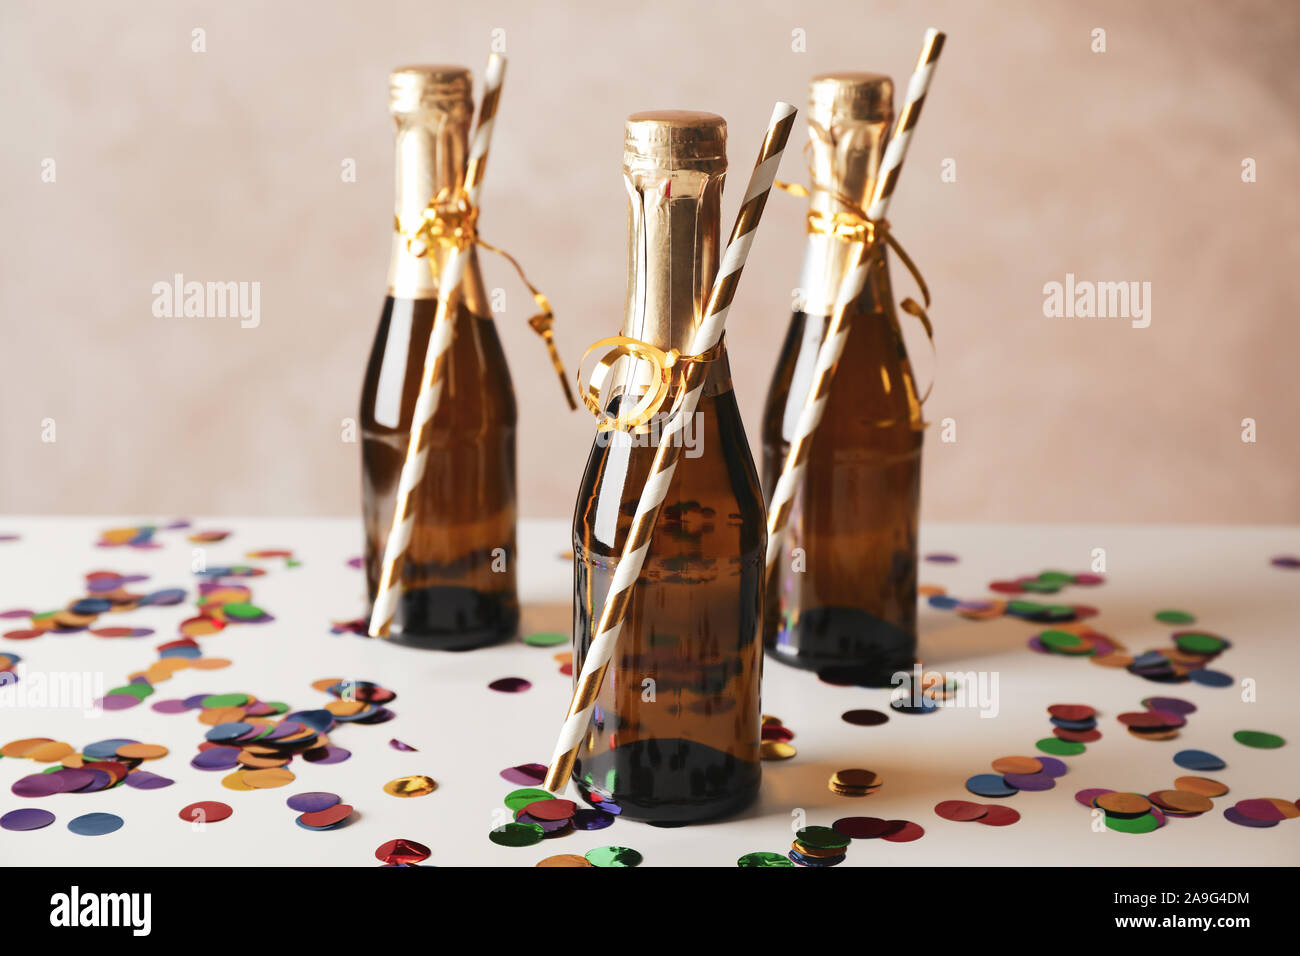 Mini champagne bottles with straws on decorated background, close up Stock Photo